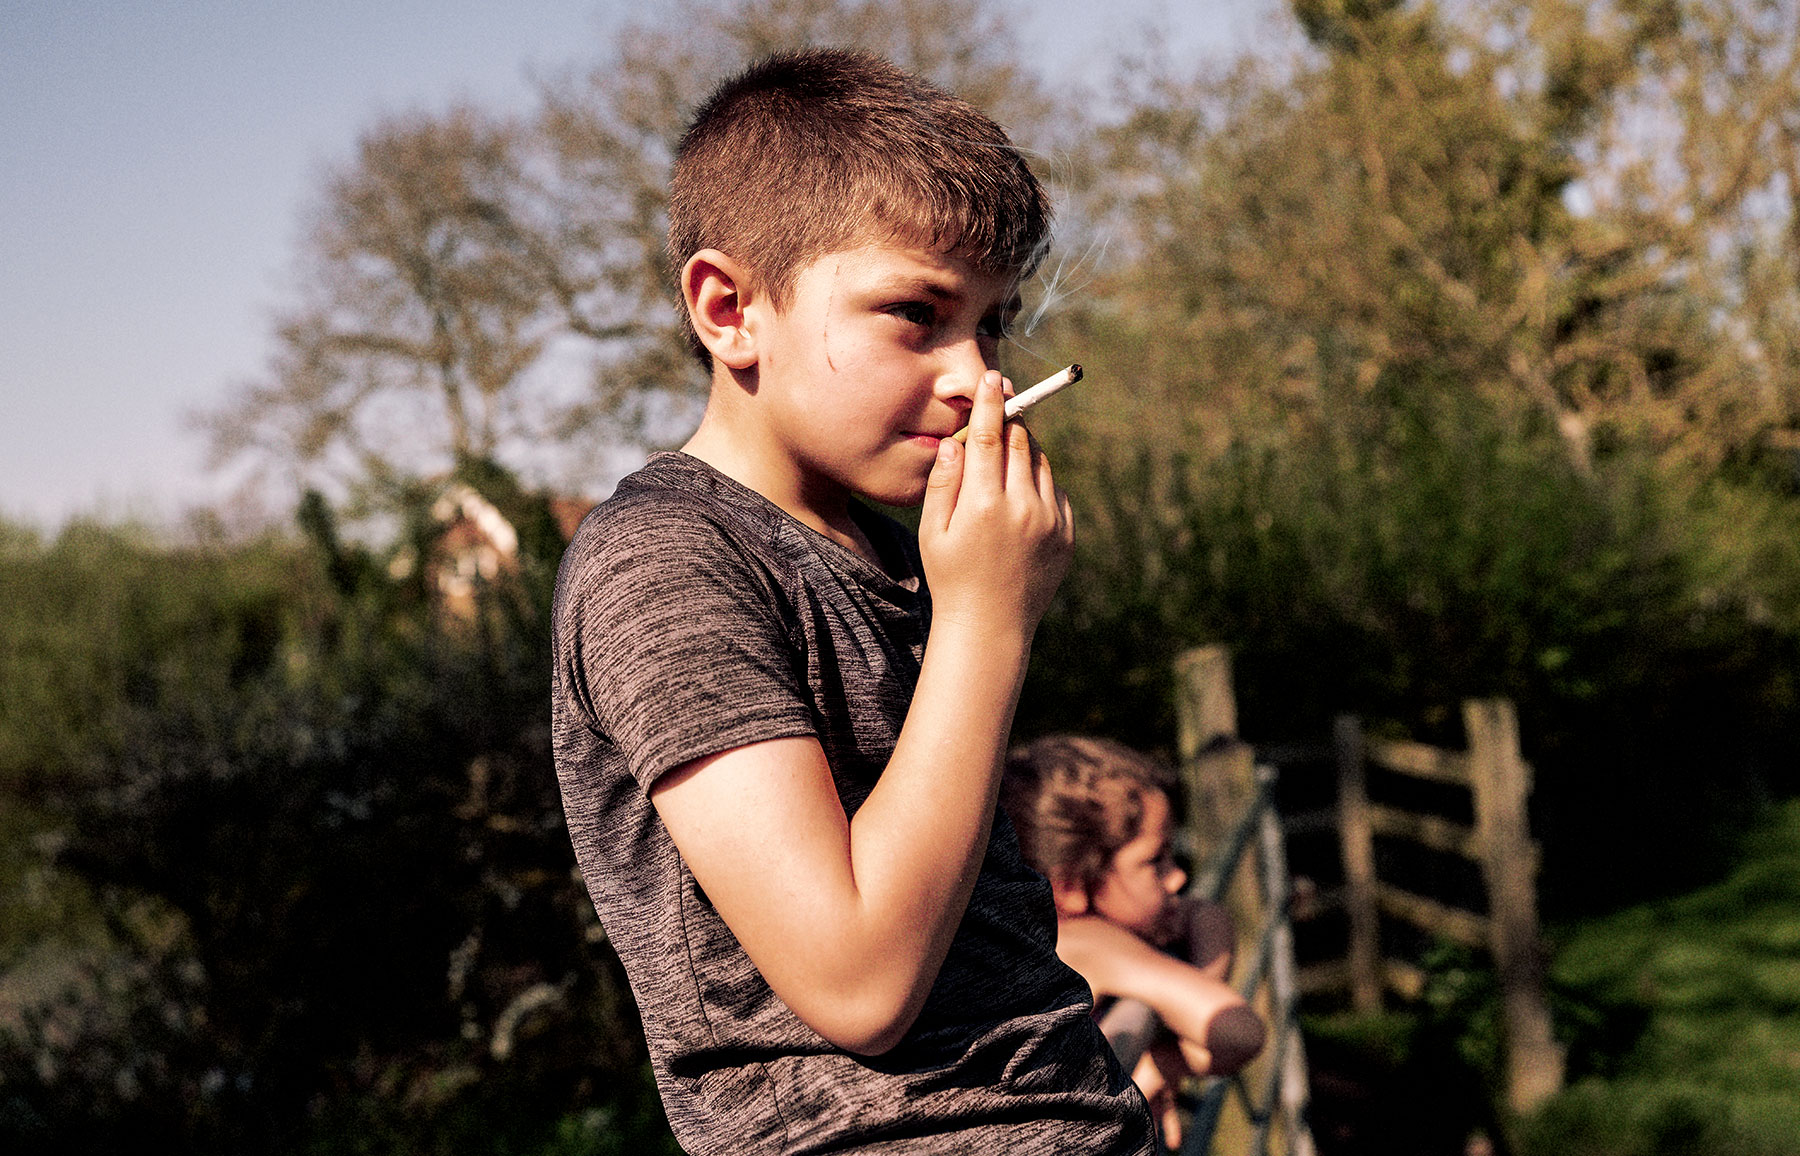 Good Boy Wolf Photographer, young boy smoking a cigarette on a fence 